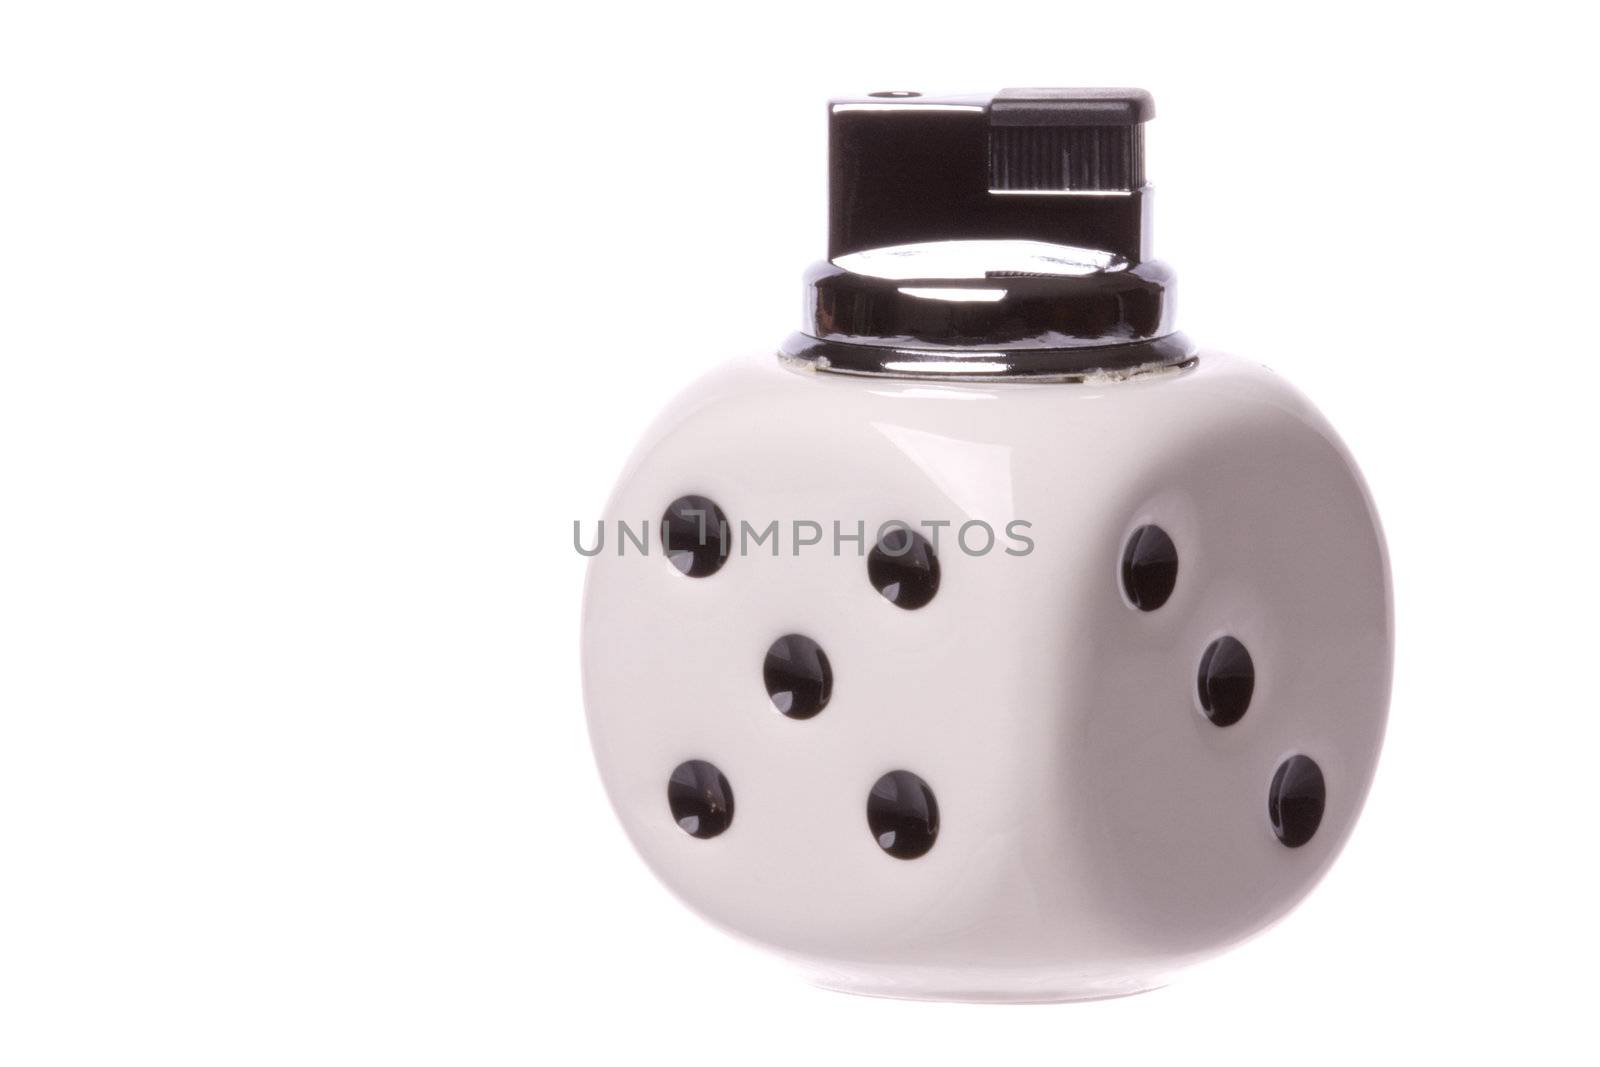 Isolated image of a die lighter.